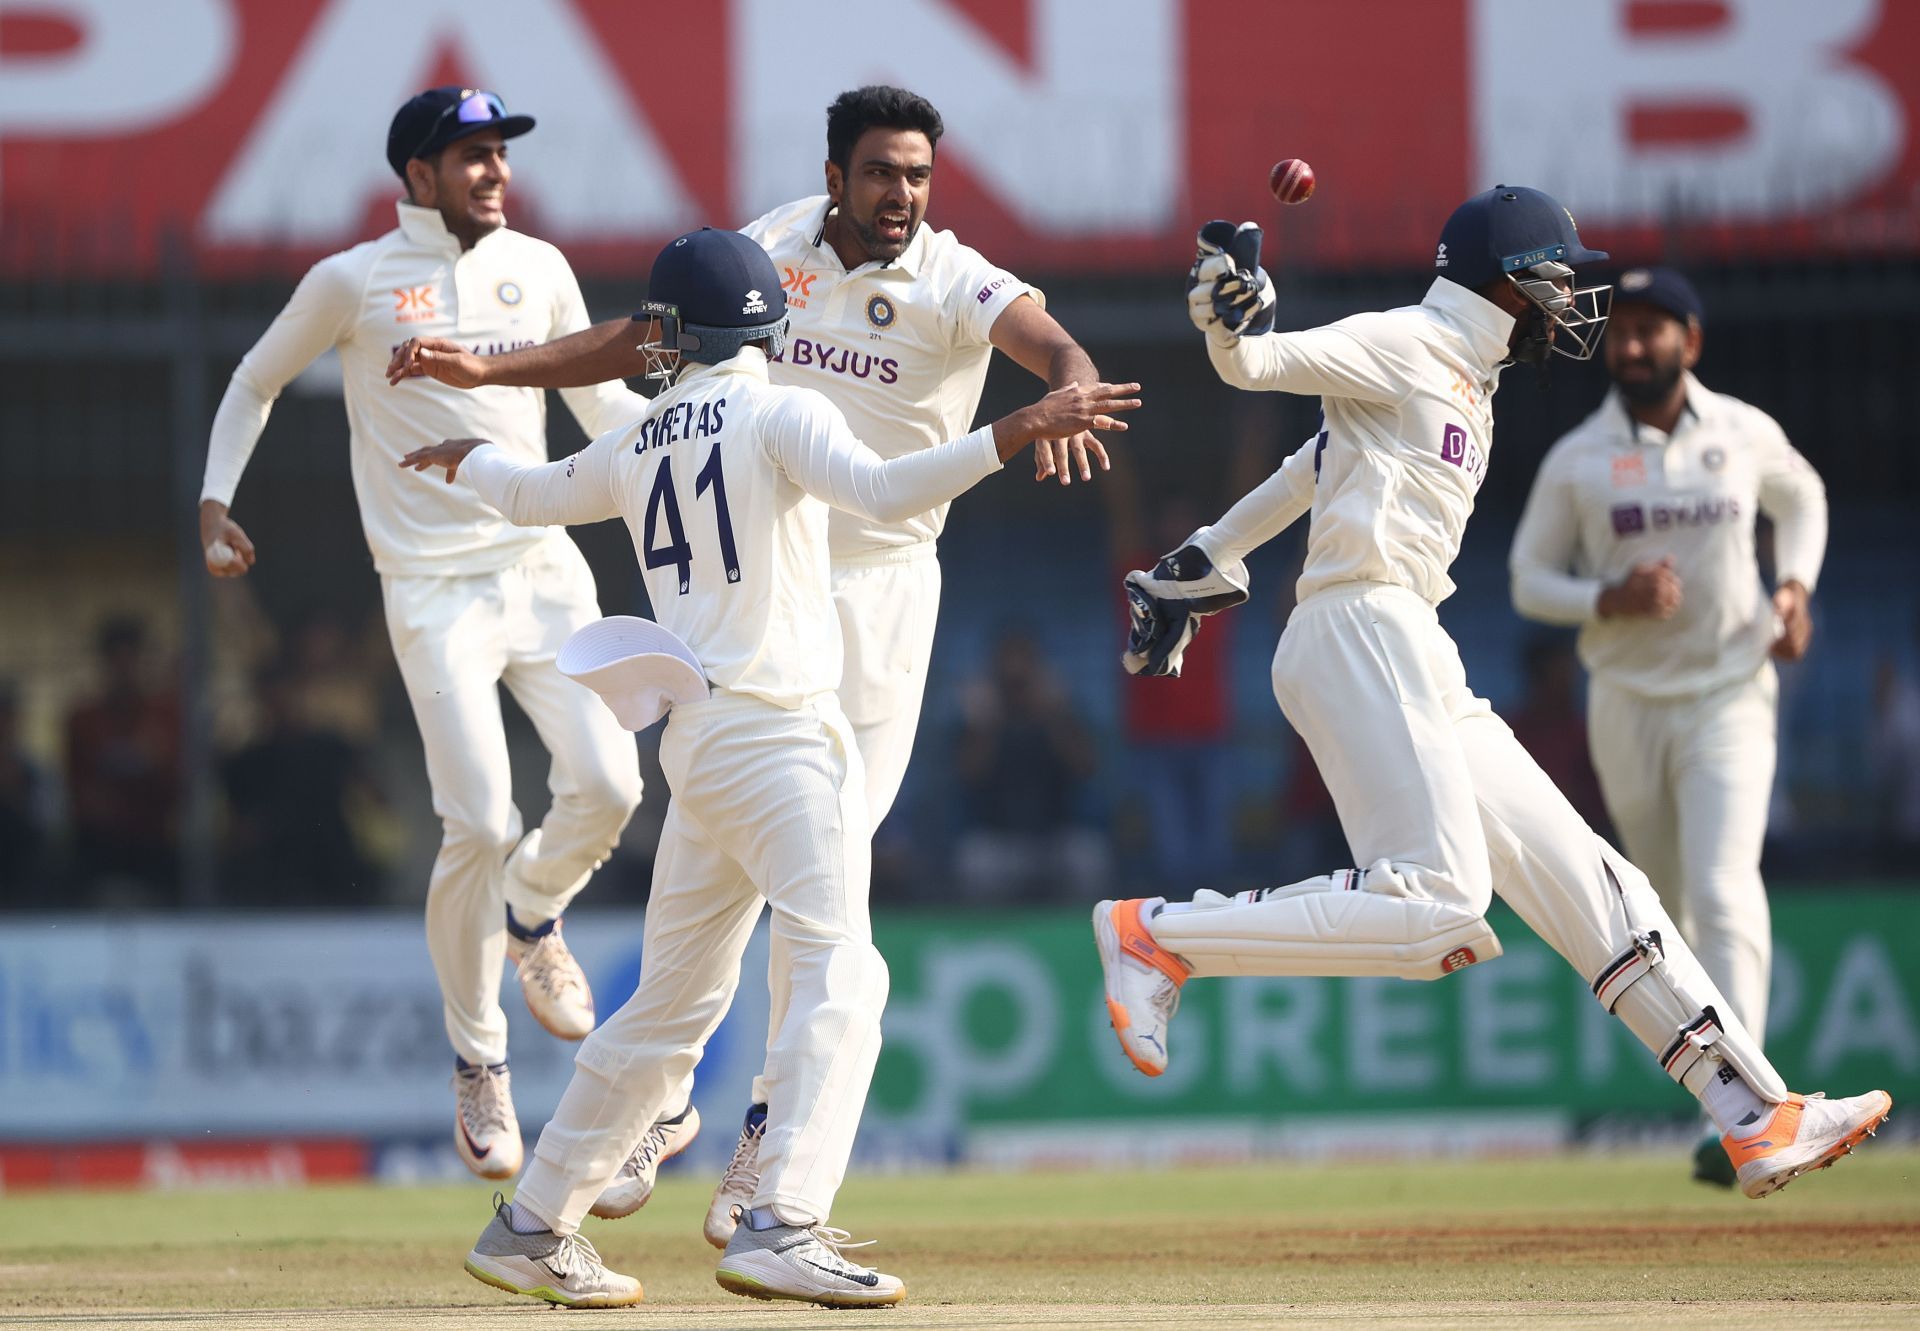 Ashwin picked up 6 wickets on a lifeless surface, which is testimony to his greatness